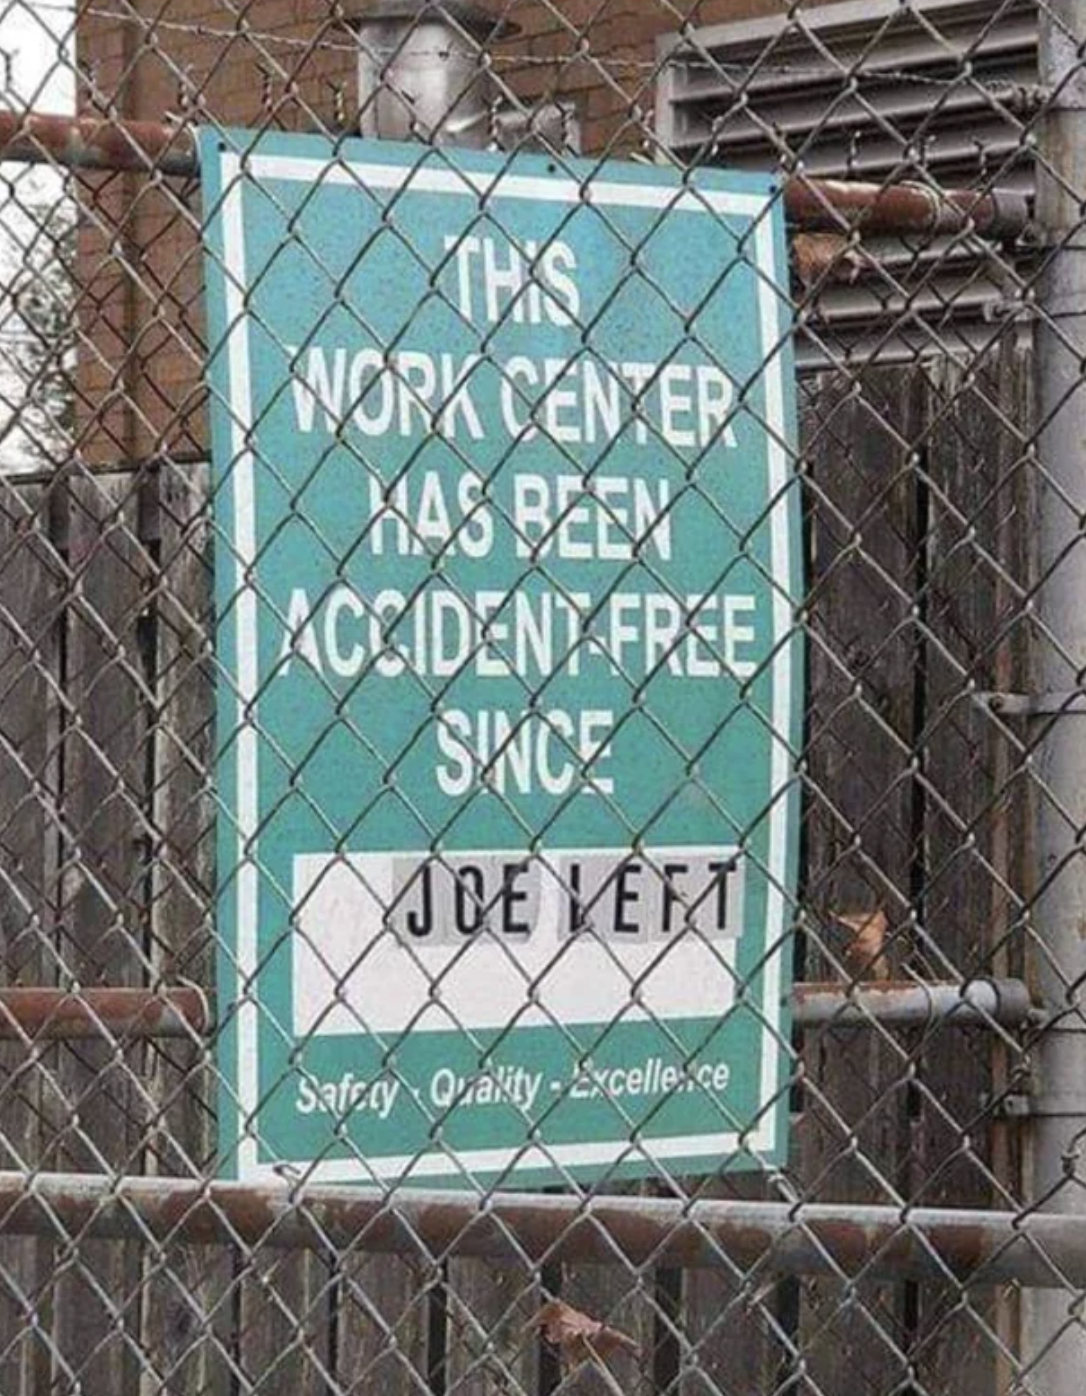 Building sign: &quot;This work center has been accident-free since [filled in:] Joe left&quot;